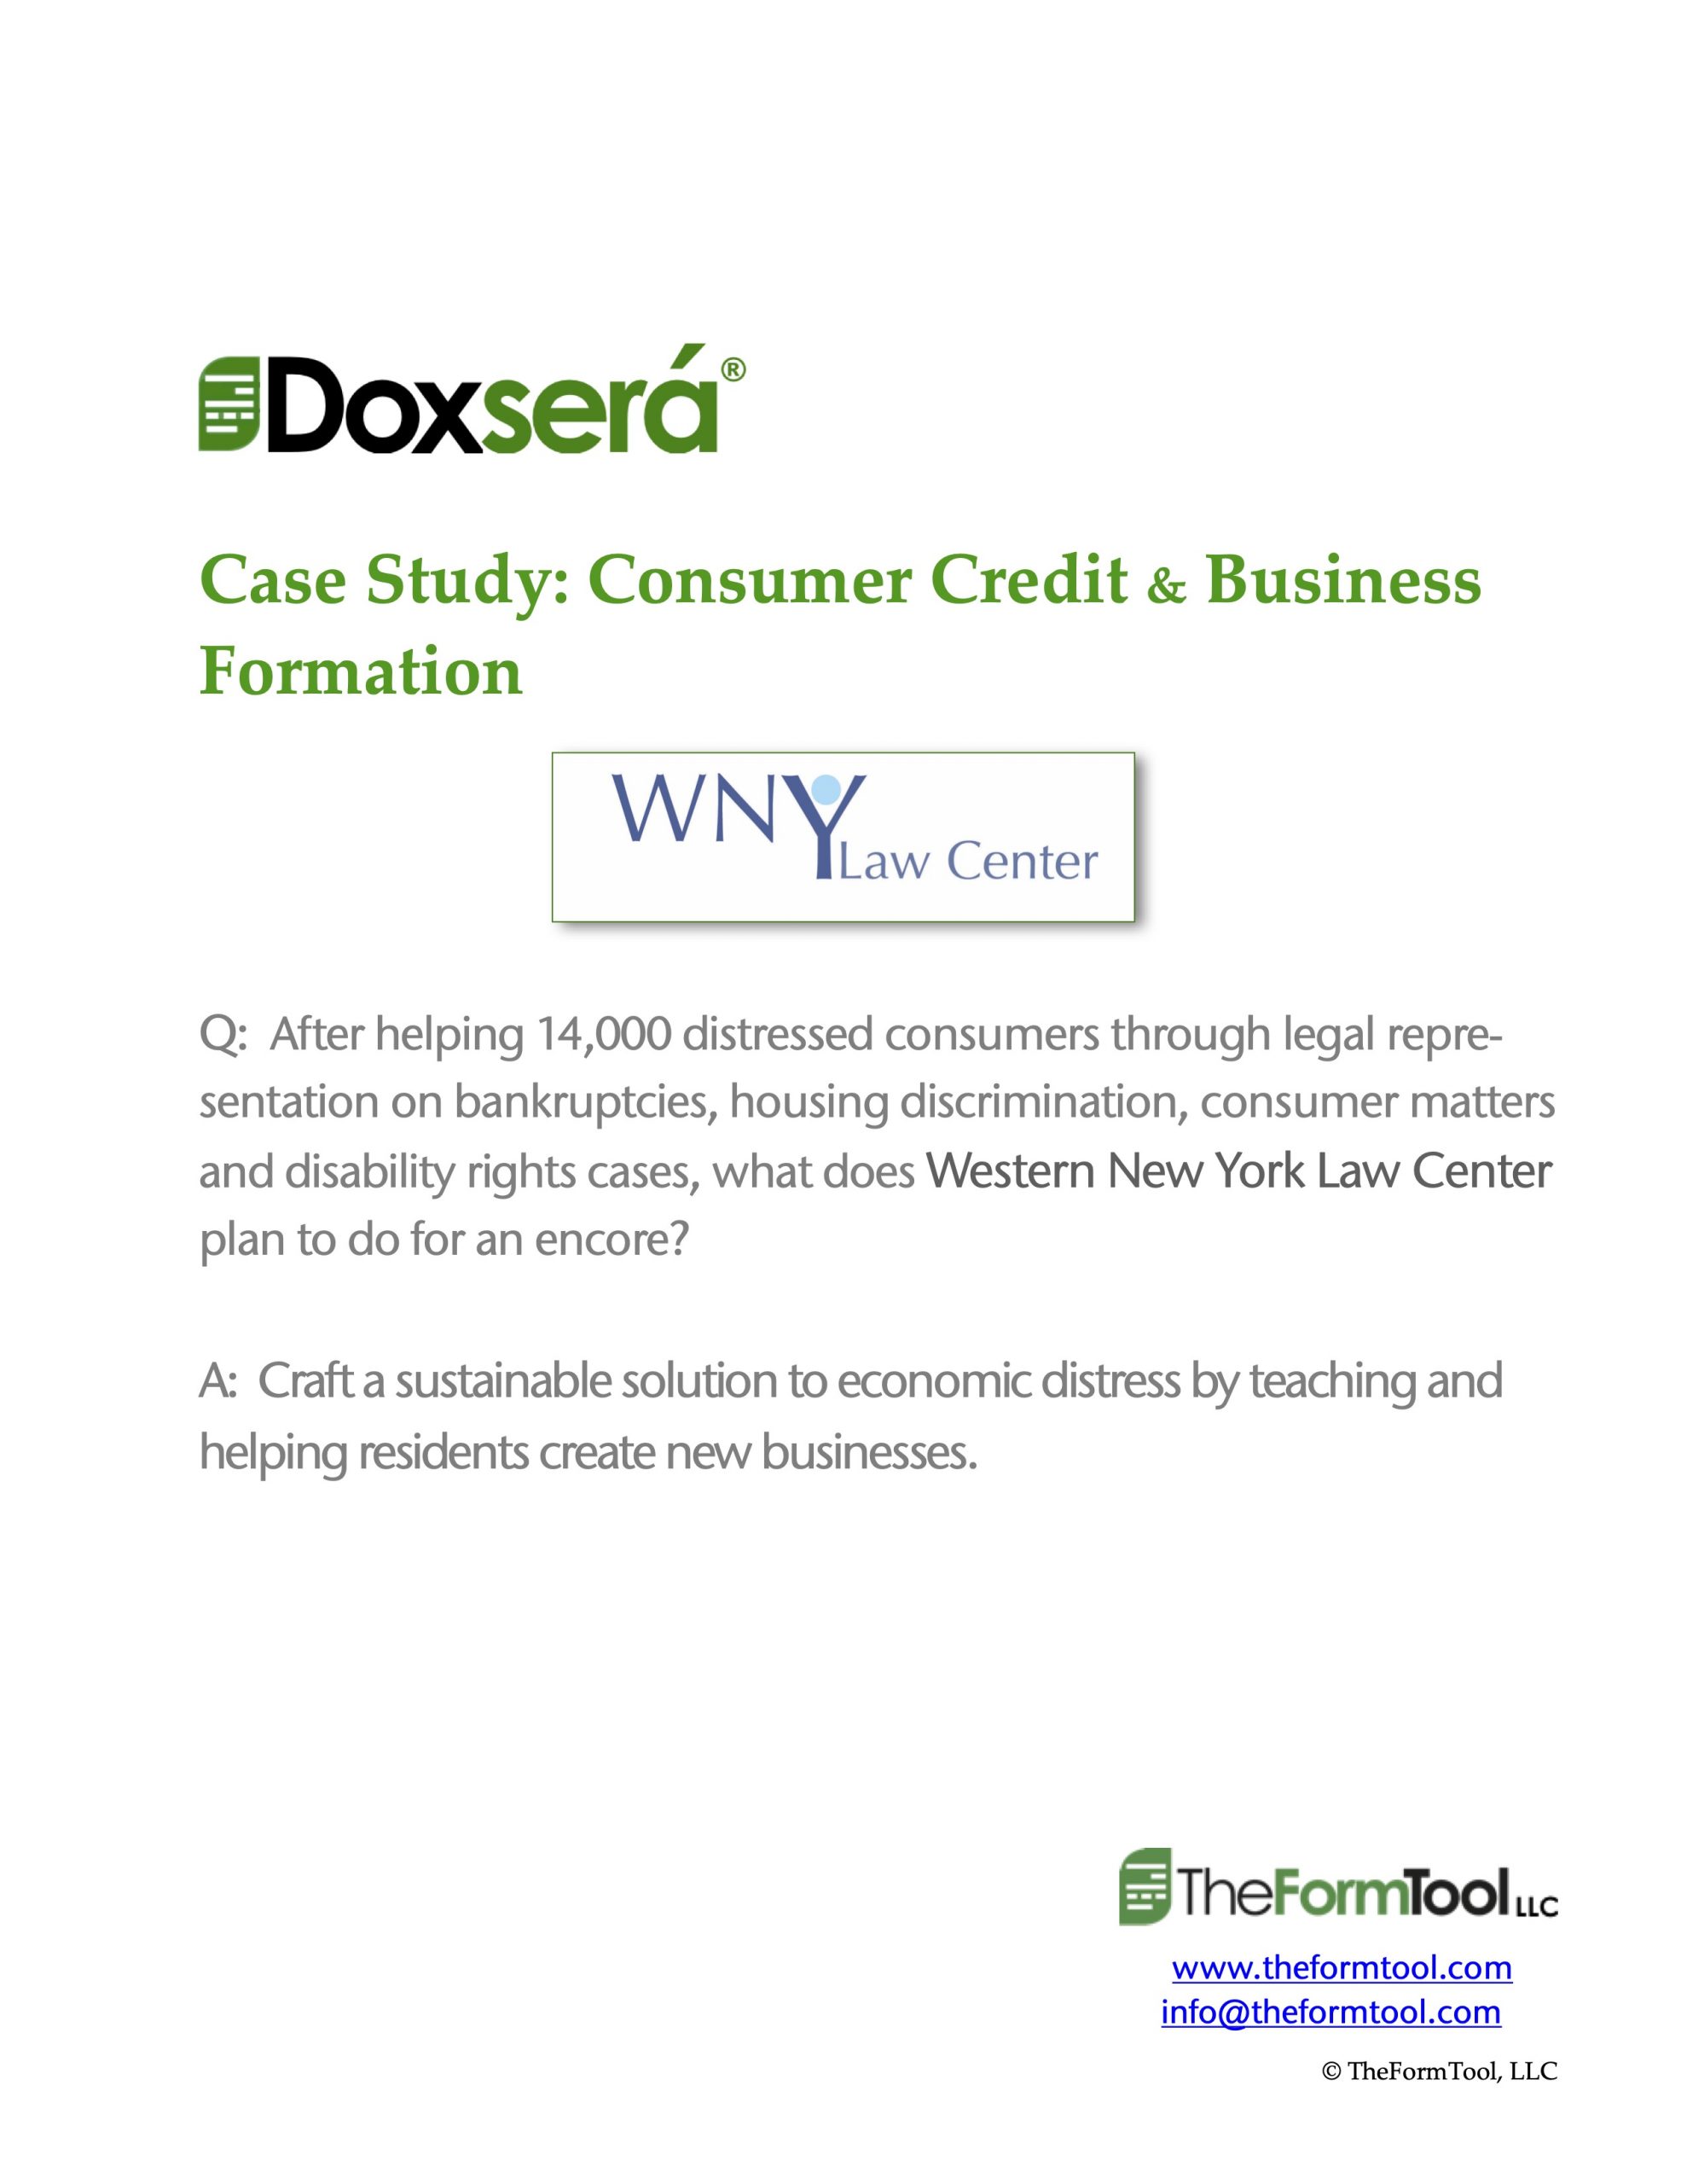 Case Study Consumer Credit & Business Formation